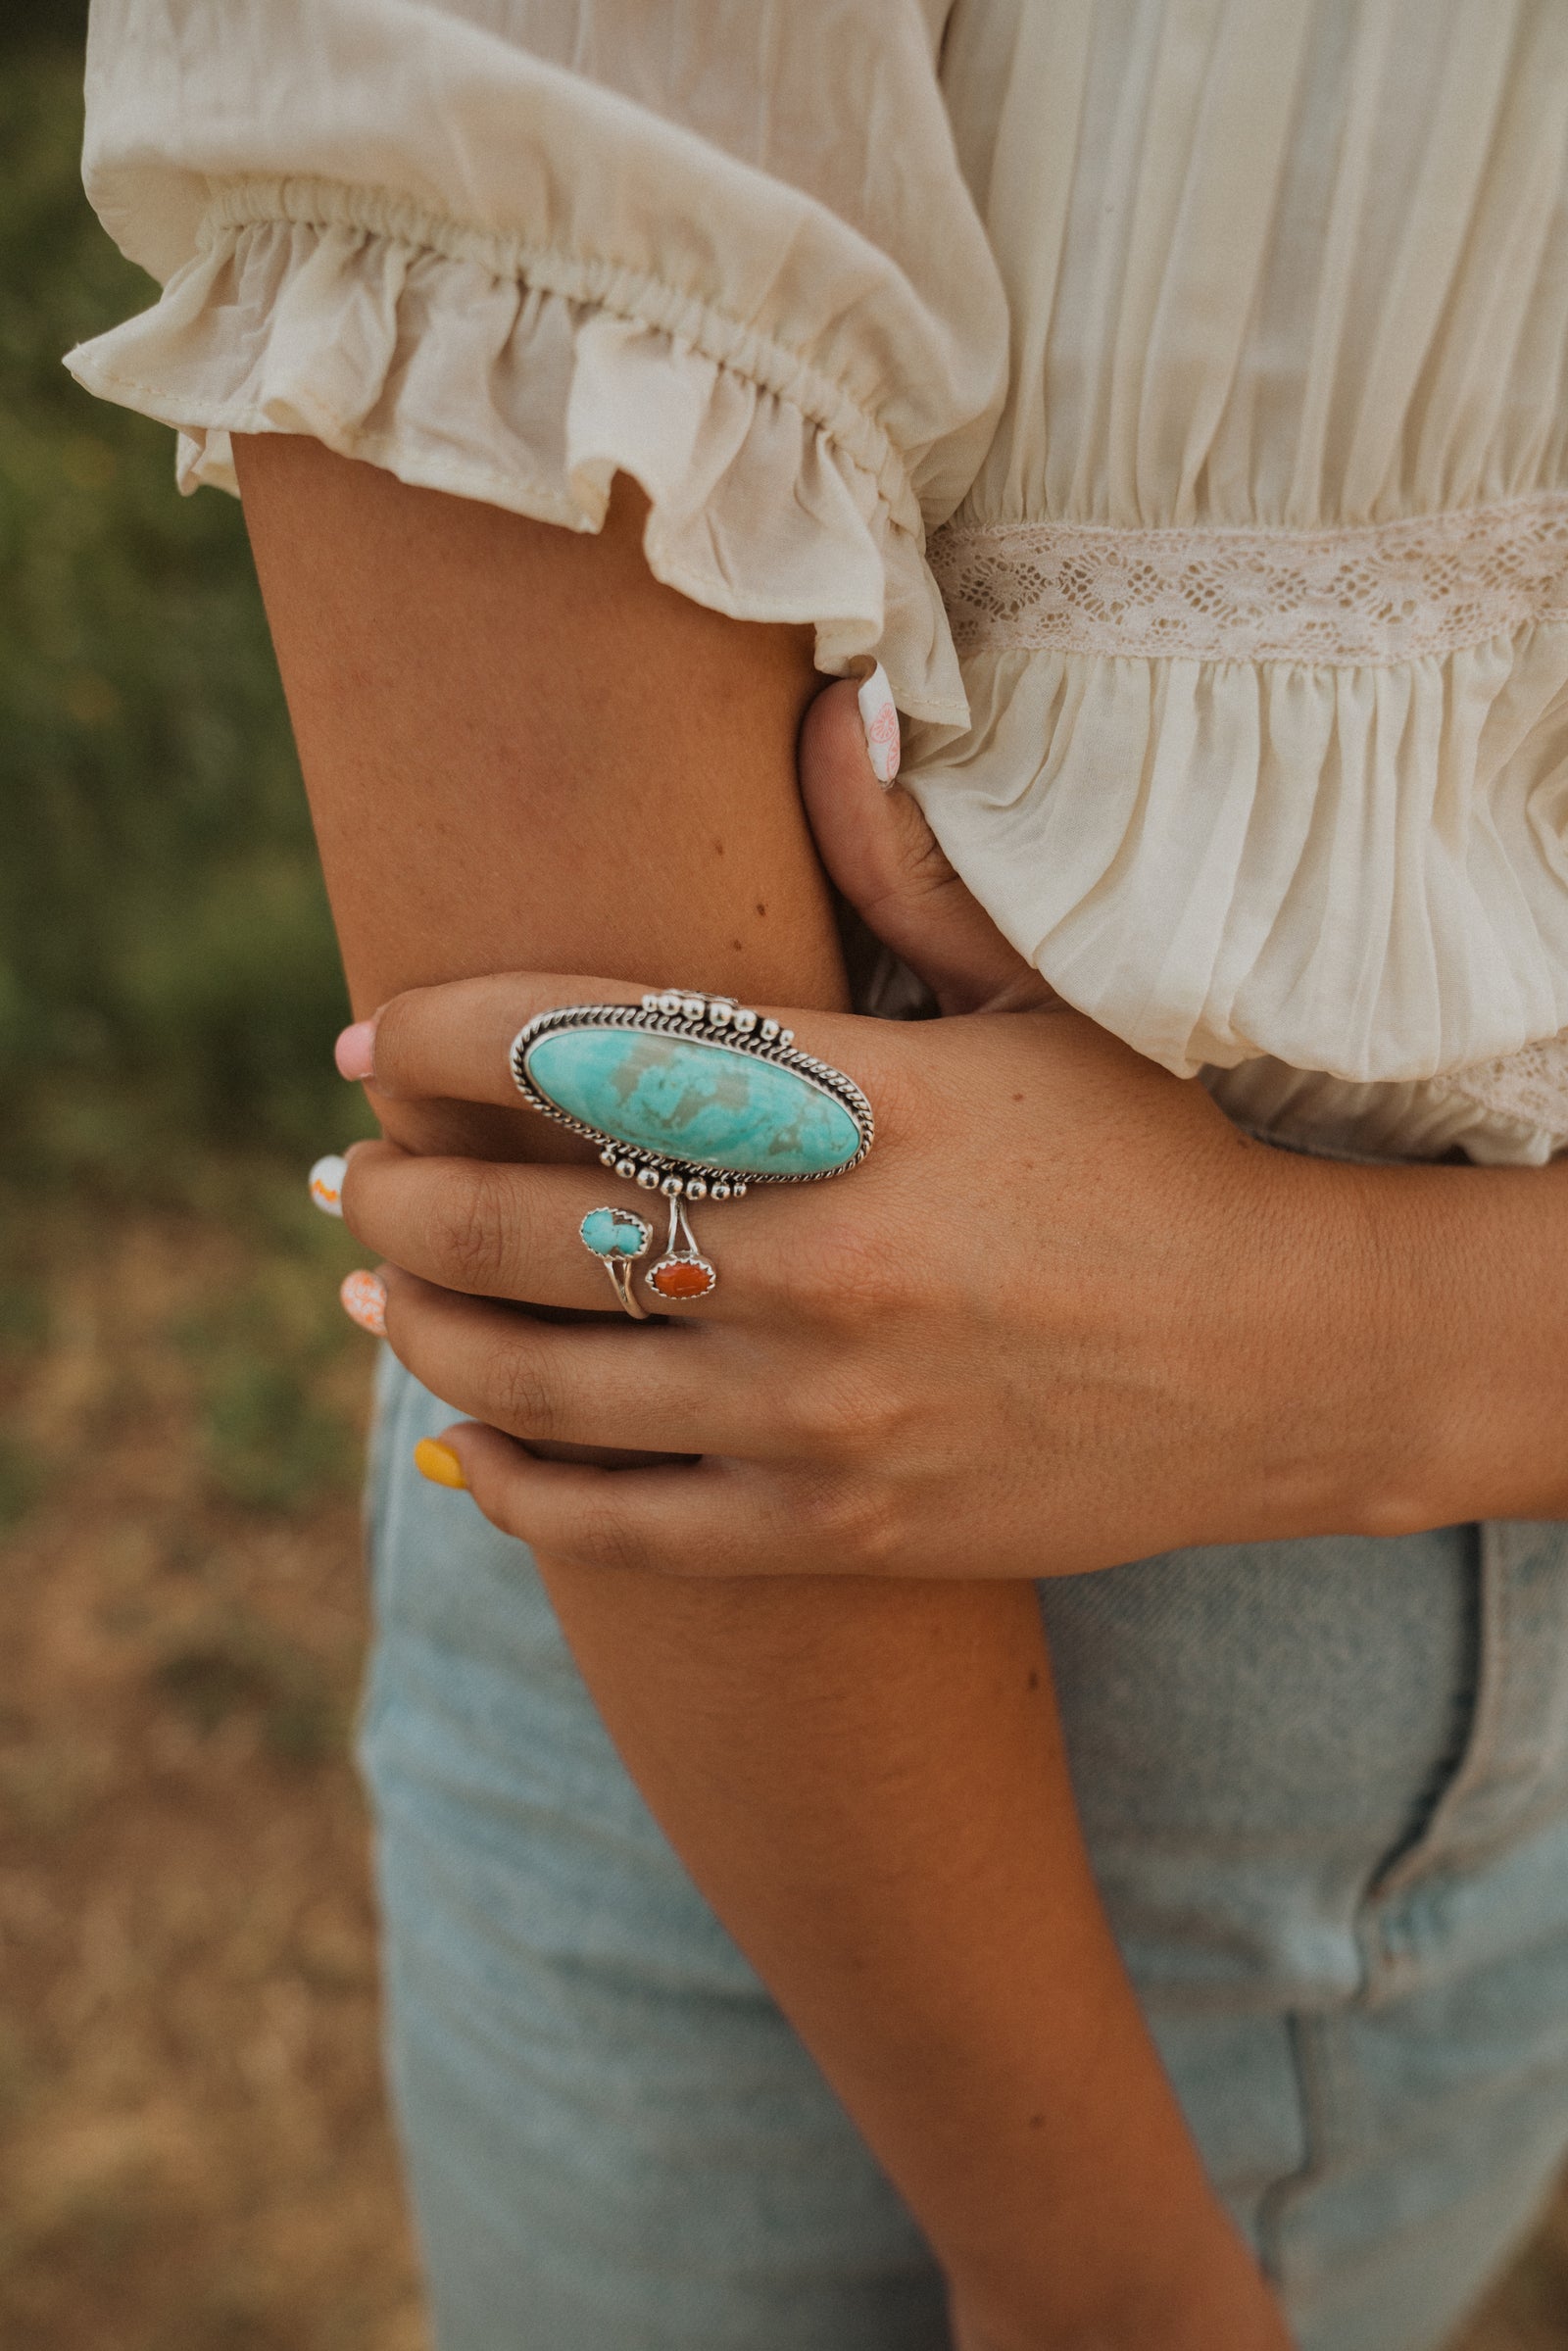 Double Rosie Ring | Turquoise + Red